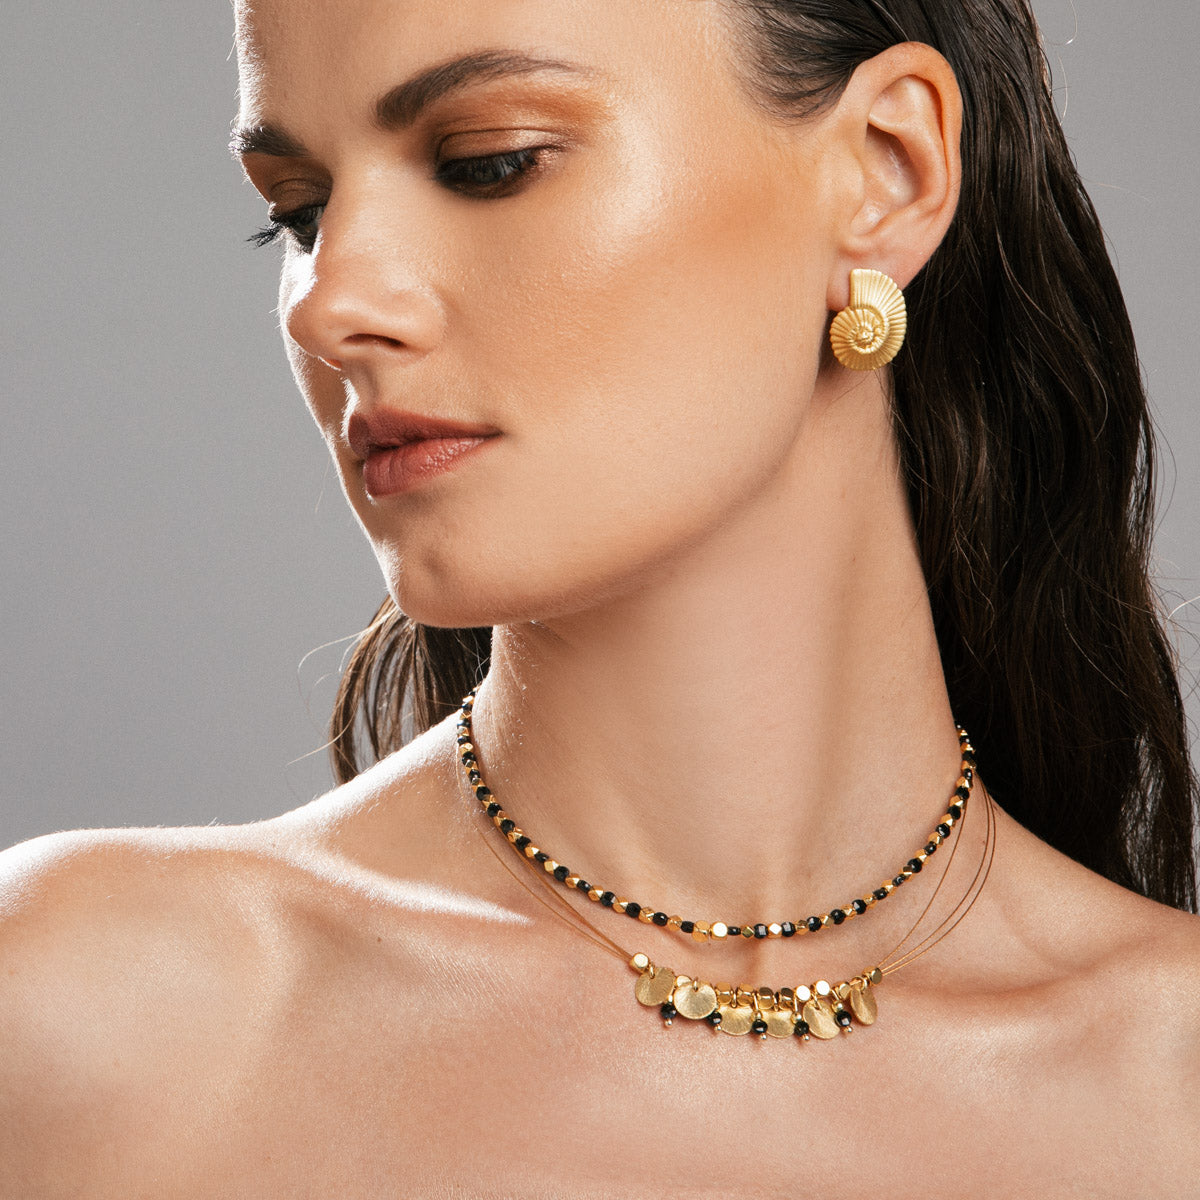 Aphrodite necklace silver 925° gold plated 22k° by Pearl Martini